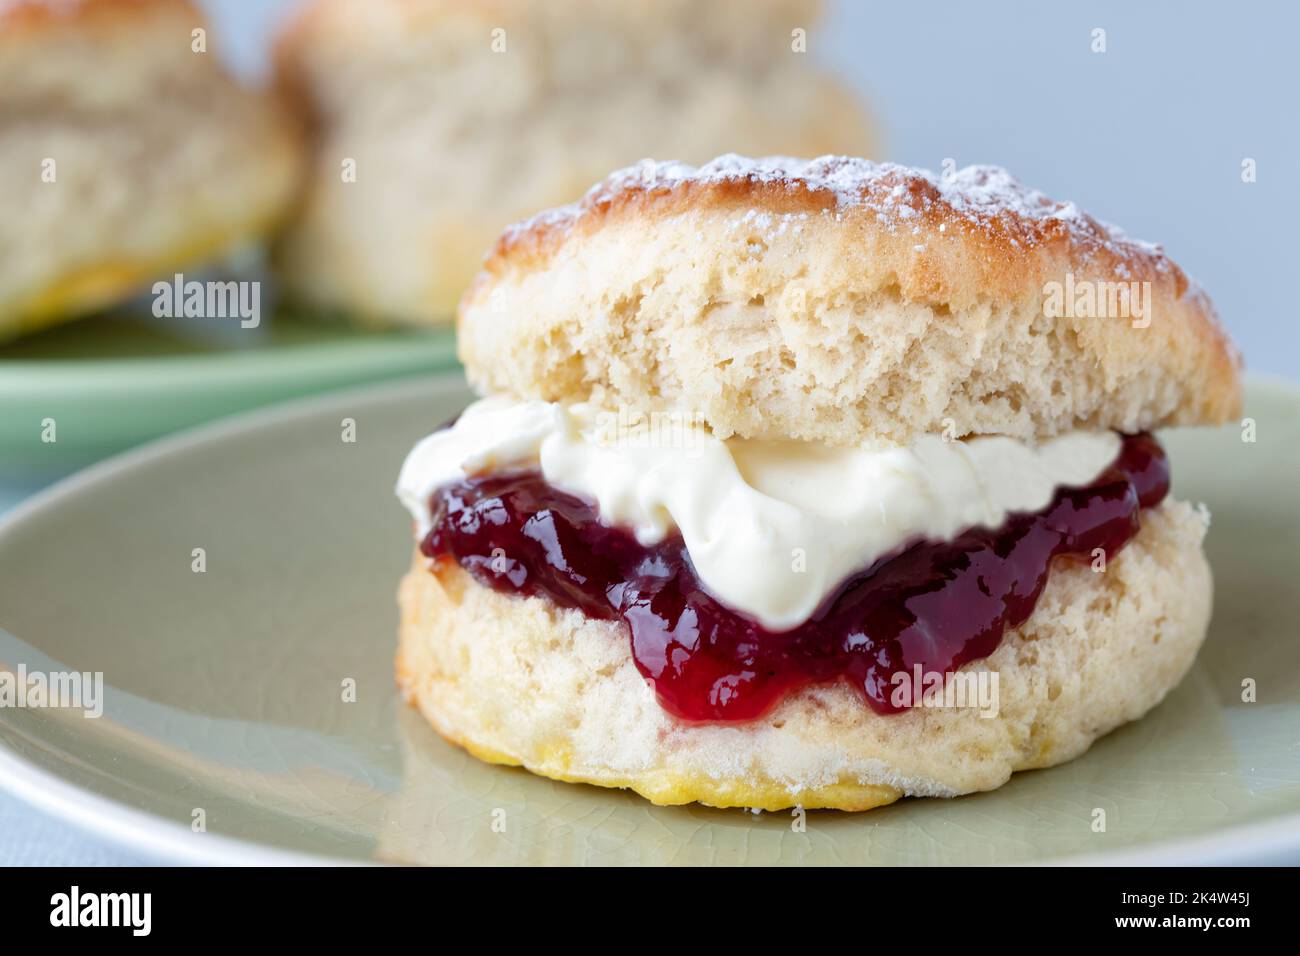 A fresh traditional English home made scone. The cake is split and filled with jam and topped with thick clotted cream. A delicious Cornish cream tea. Stock Photo